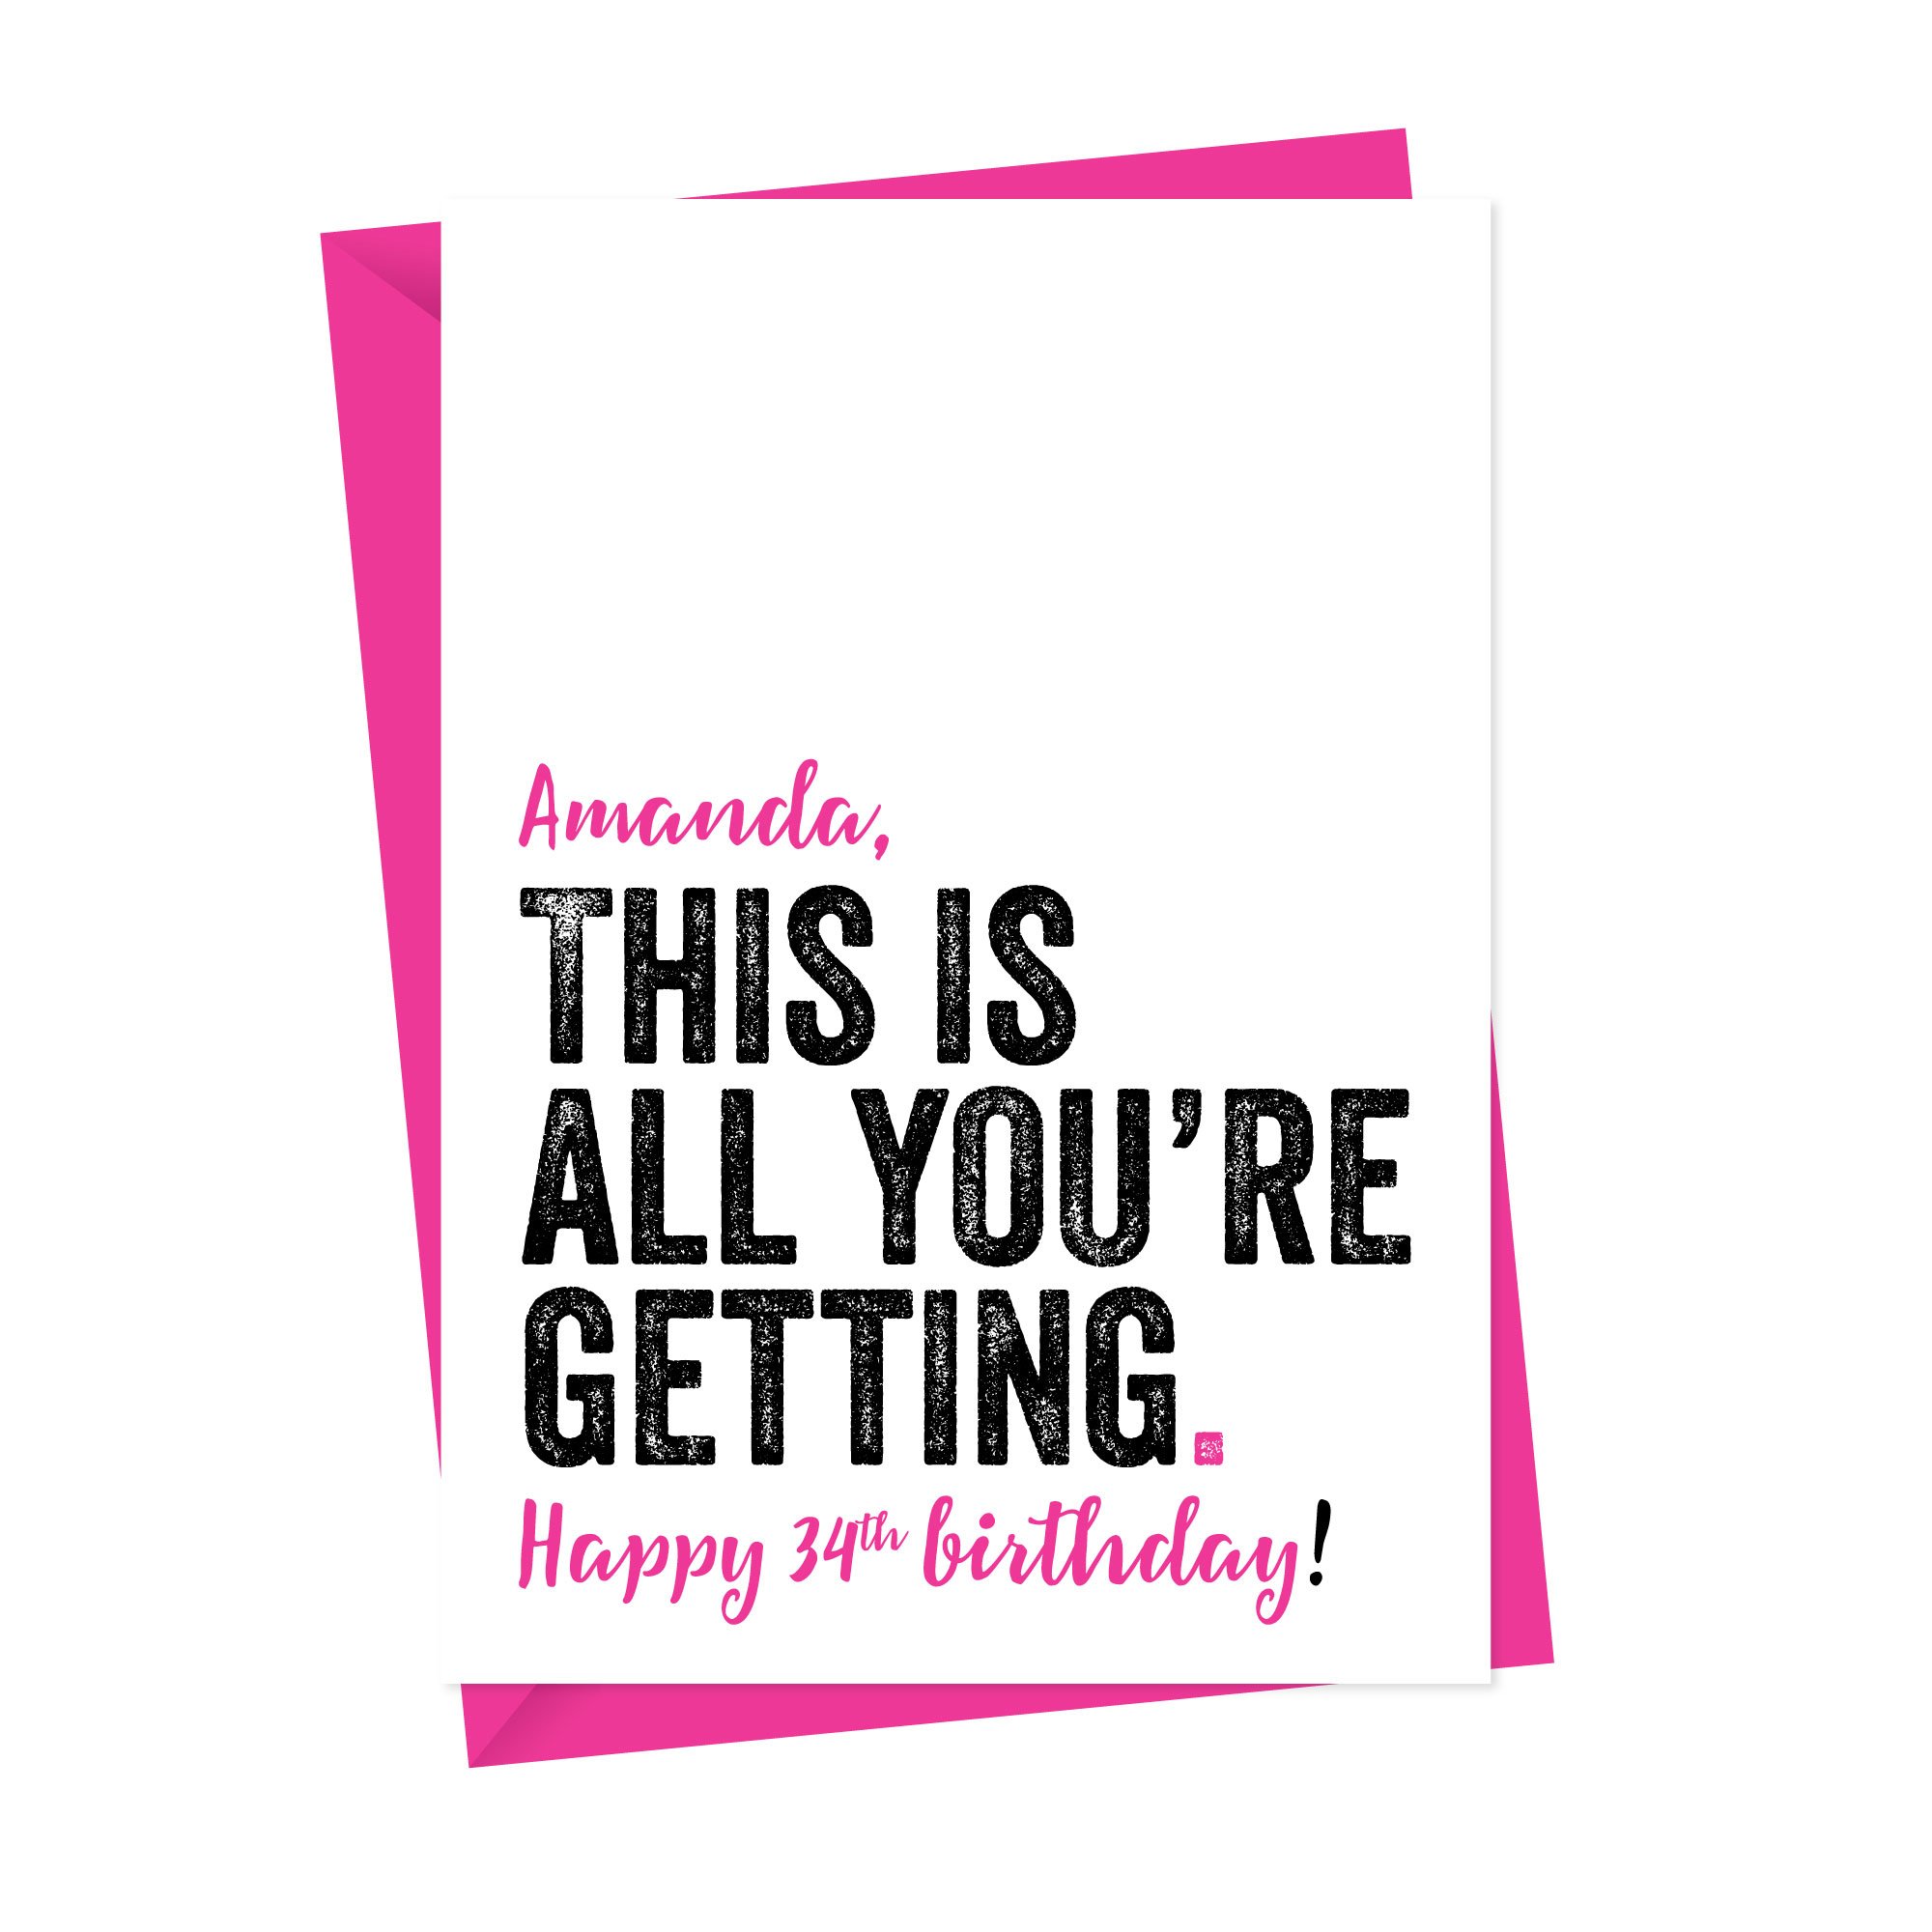 This is all you are getting personalised birthday card